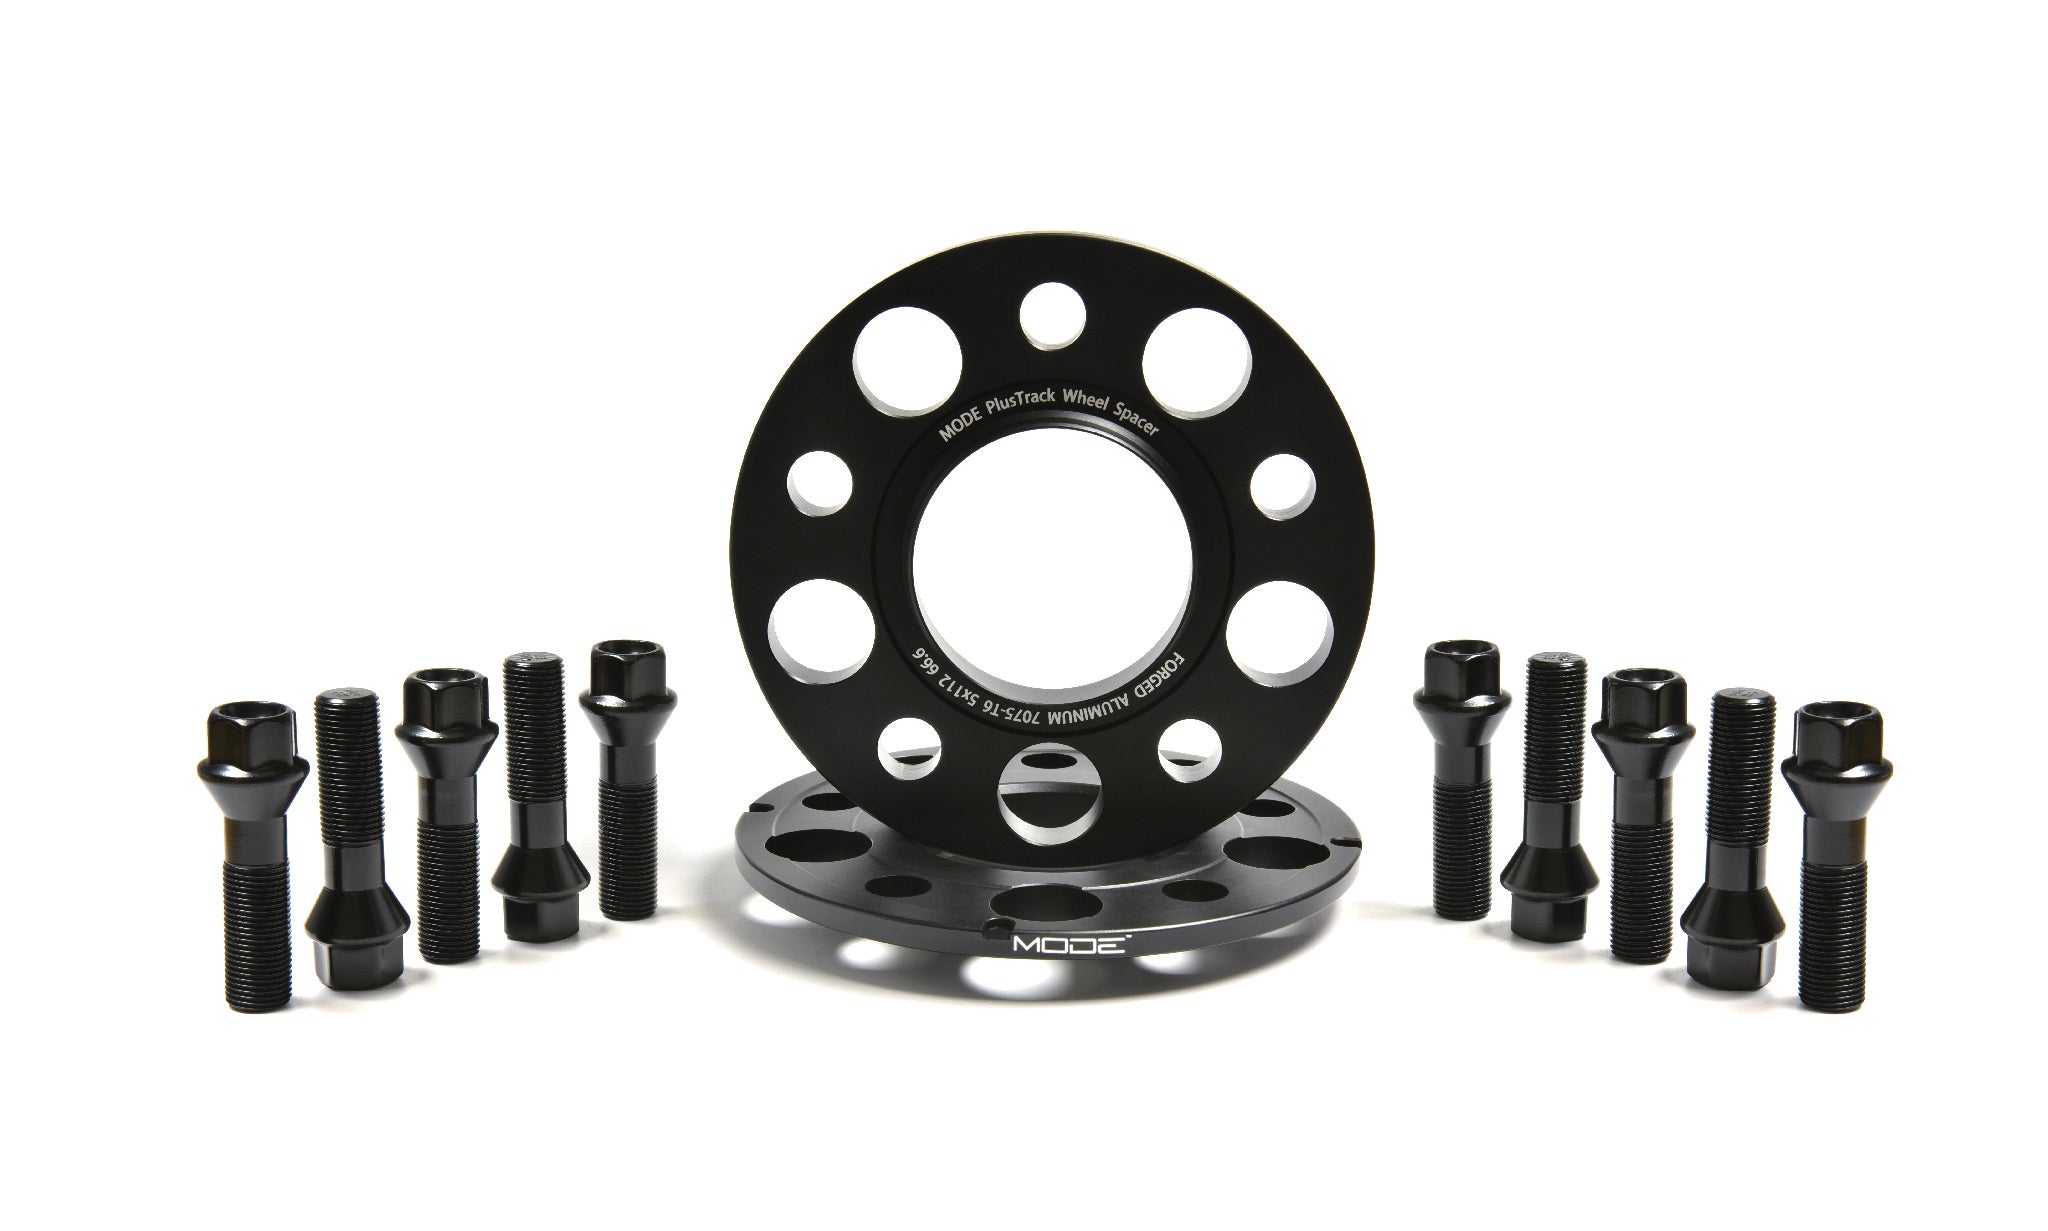 MODE PlusTrack Wheel Spacer Kit 5mm BMW (F-Series) - MODE Auto Concepts